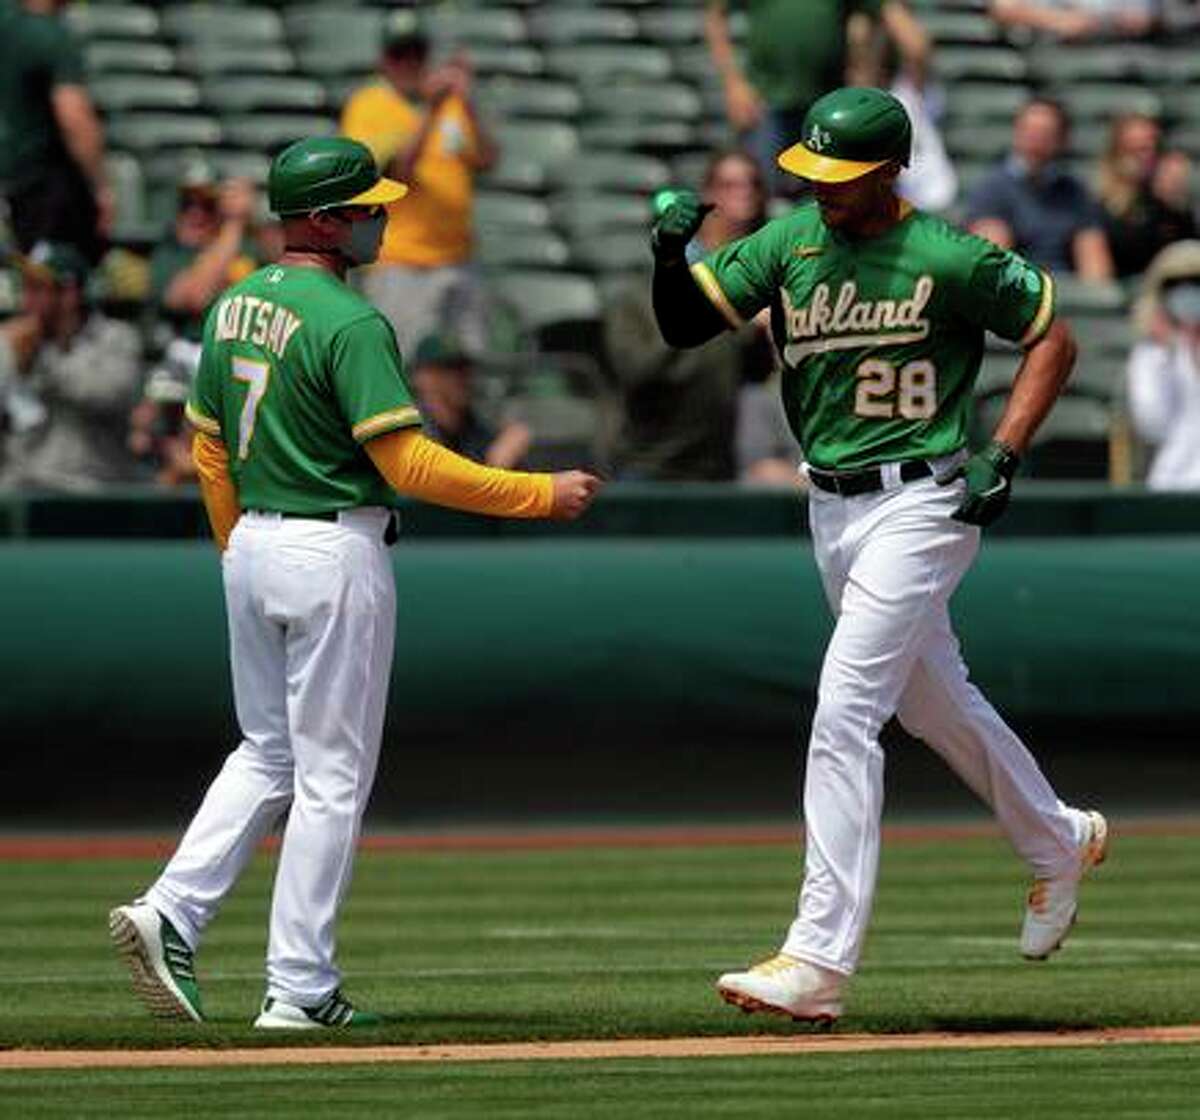 Matt Olson (28) high fives third base coach Mark Kotsay as he rounds the bases on his solo homerun in the second inning as the Oakland Athletics played the Minnesota Twins at the Oakland Coliseum in Oakland, Calif., on Wednesday, April 21, 2021.